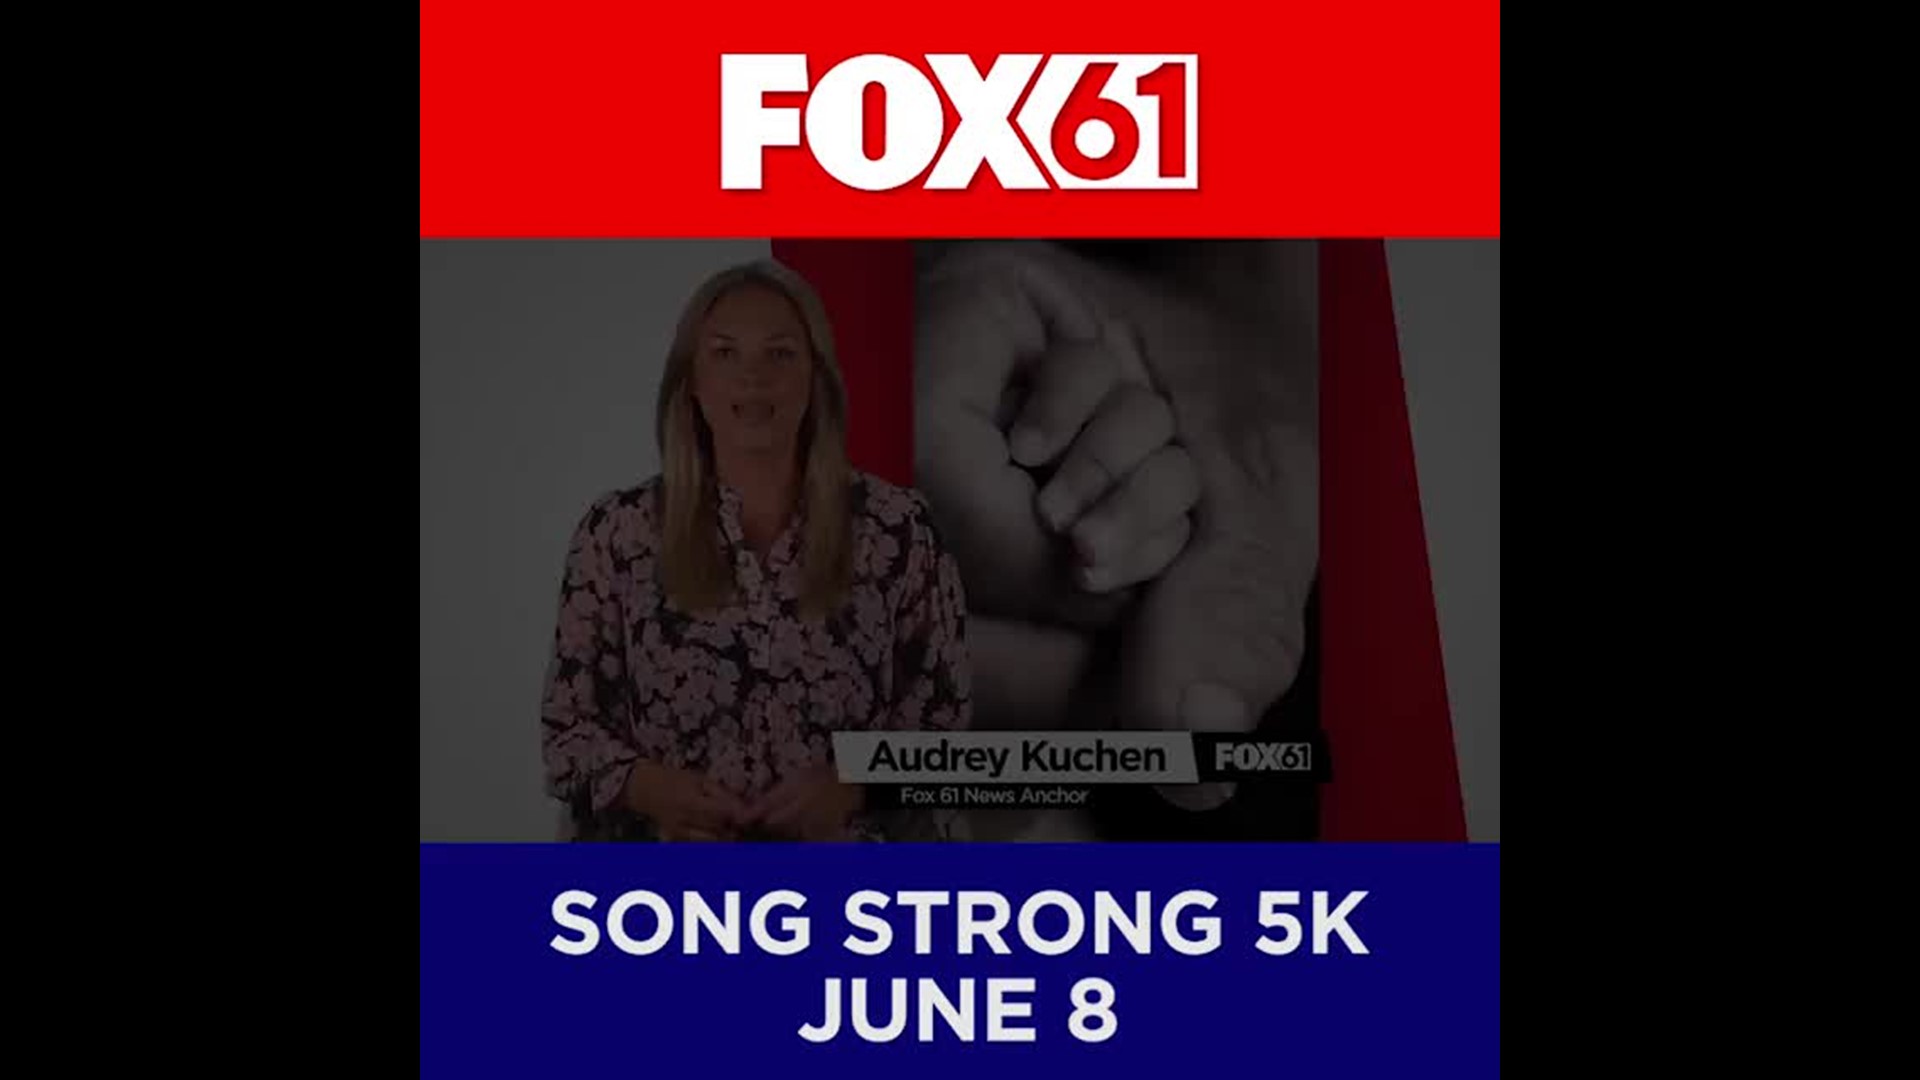 SONG STRONG 5K